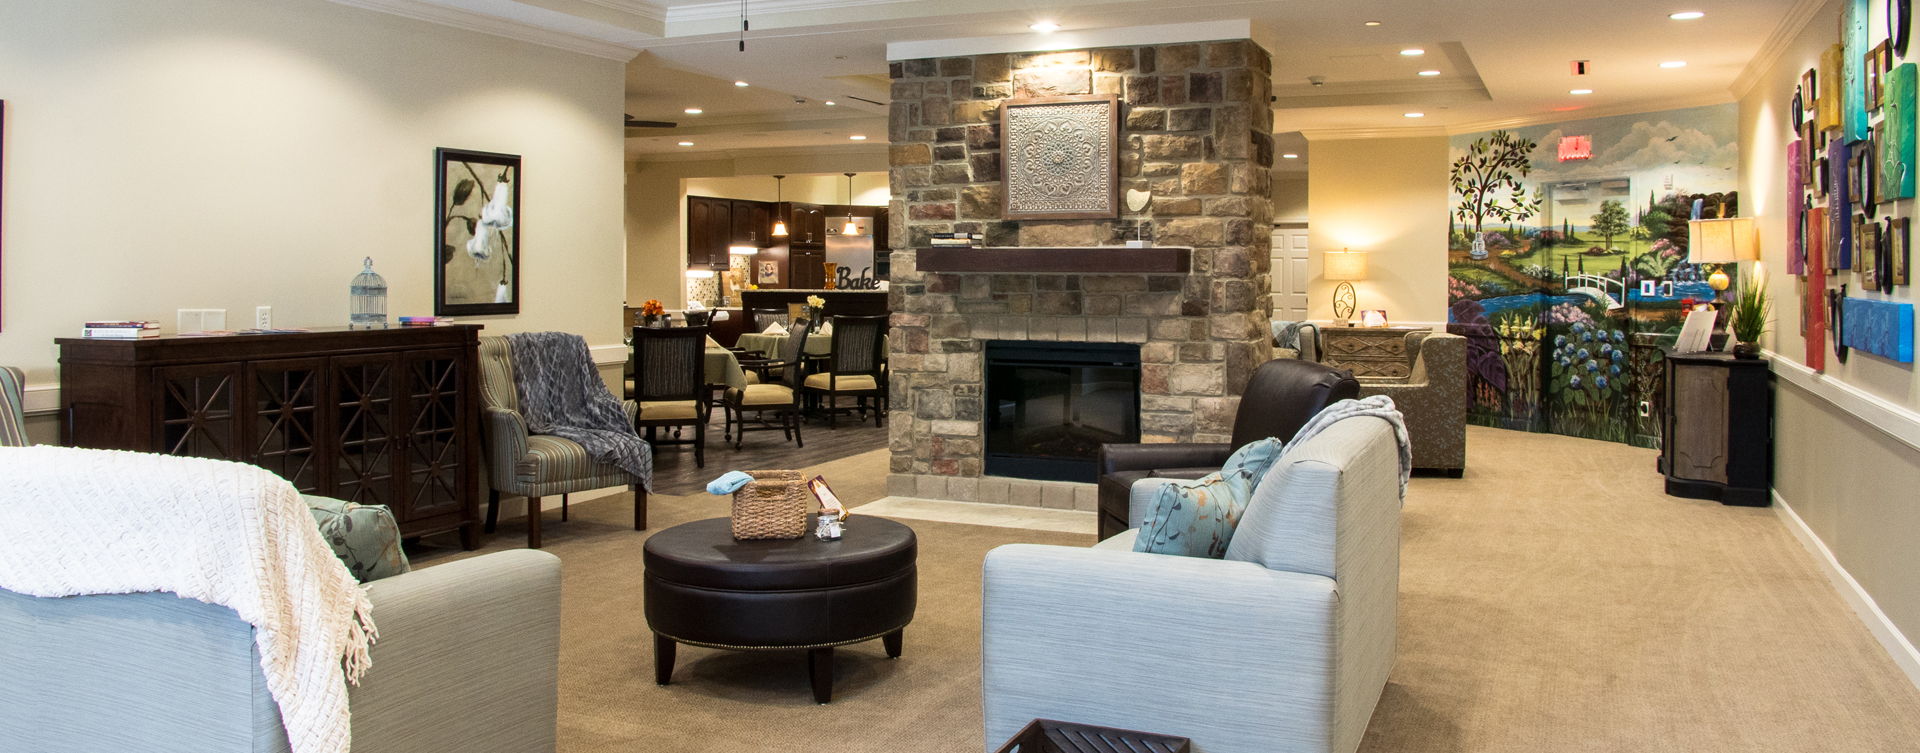 Mary B’s living room provides a smaller, more intimate setting to encourage interaction at Bickford of Chesterfield